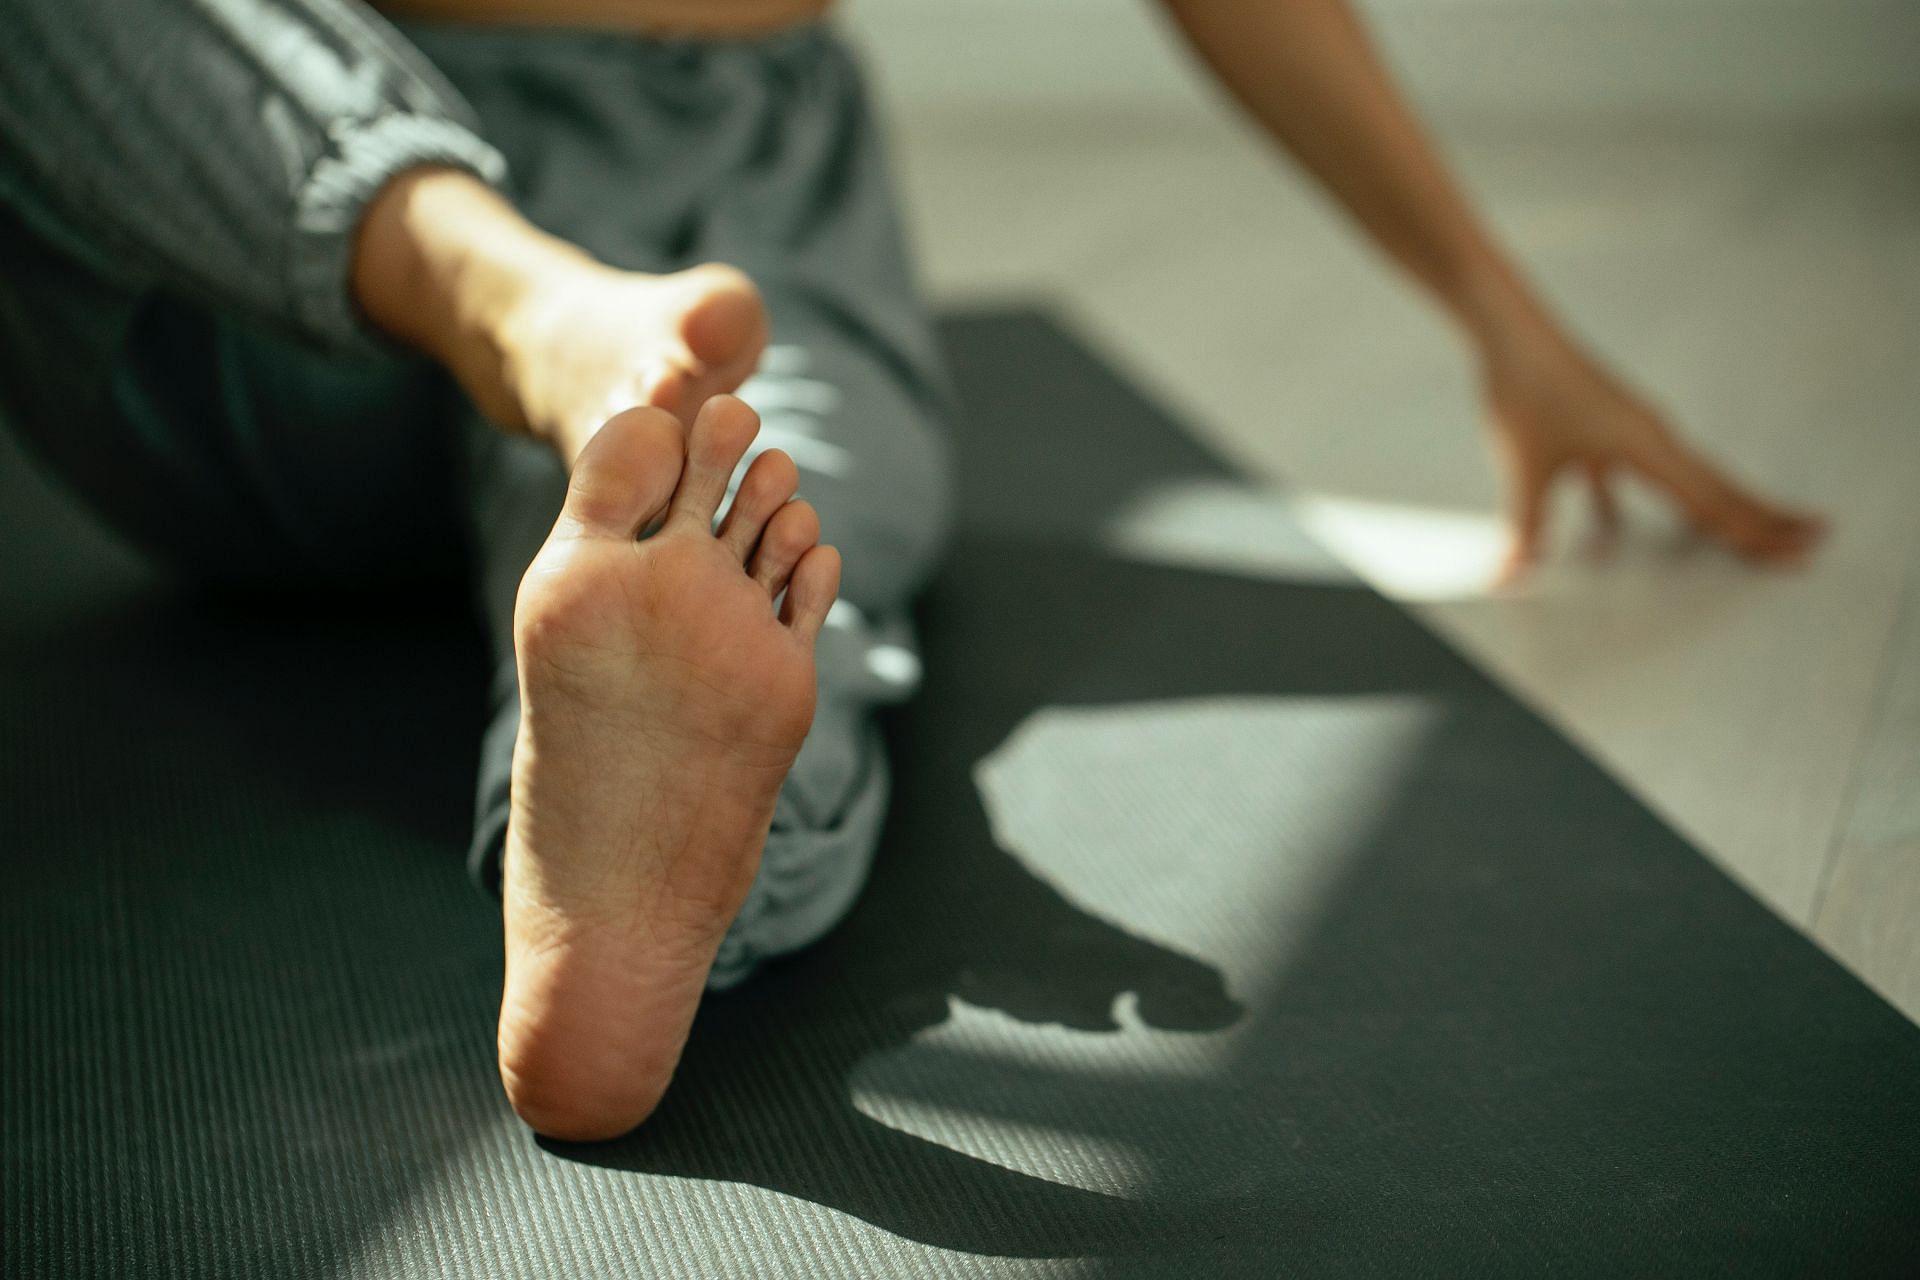 Ankle stretches before bedtime. (Image via Pexels/ Miriam Alonso)